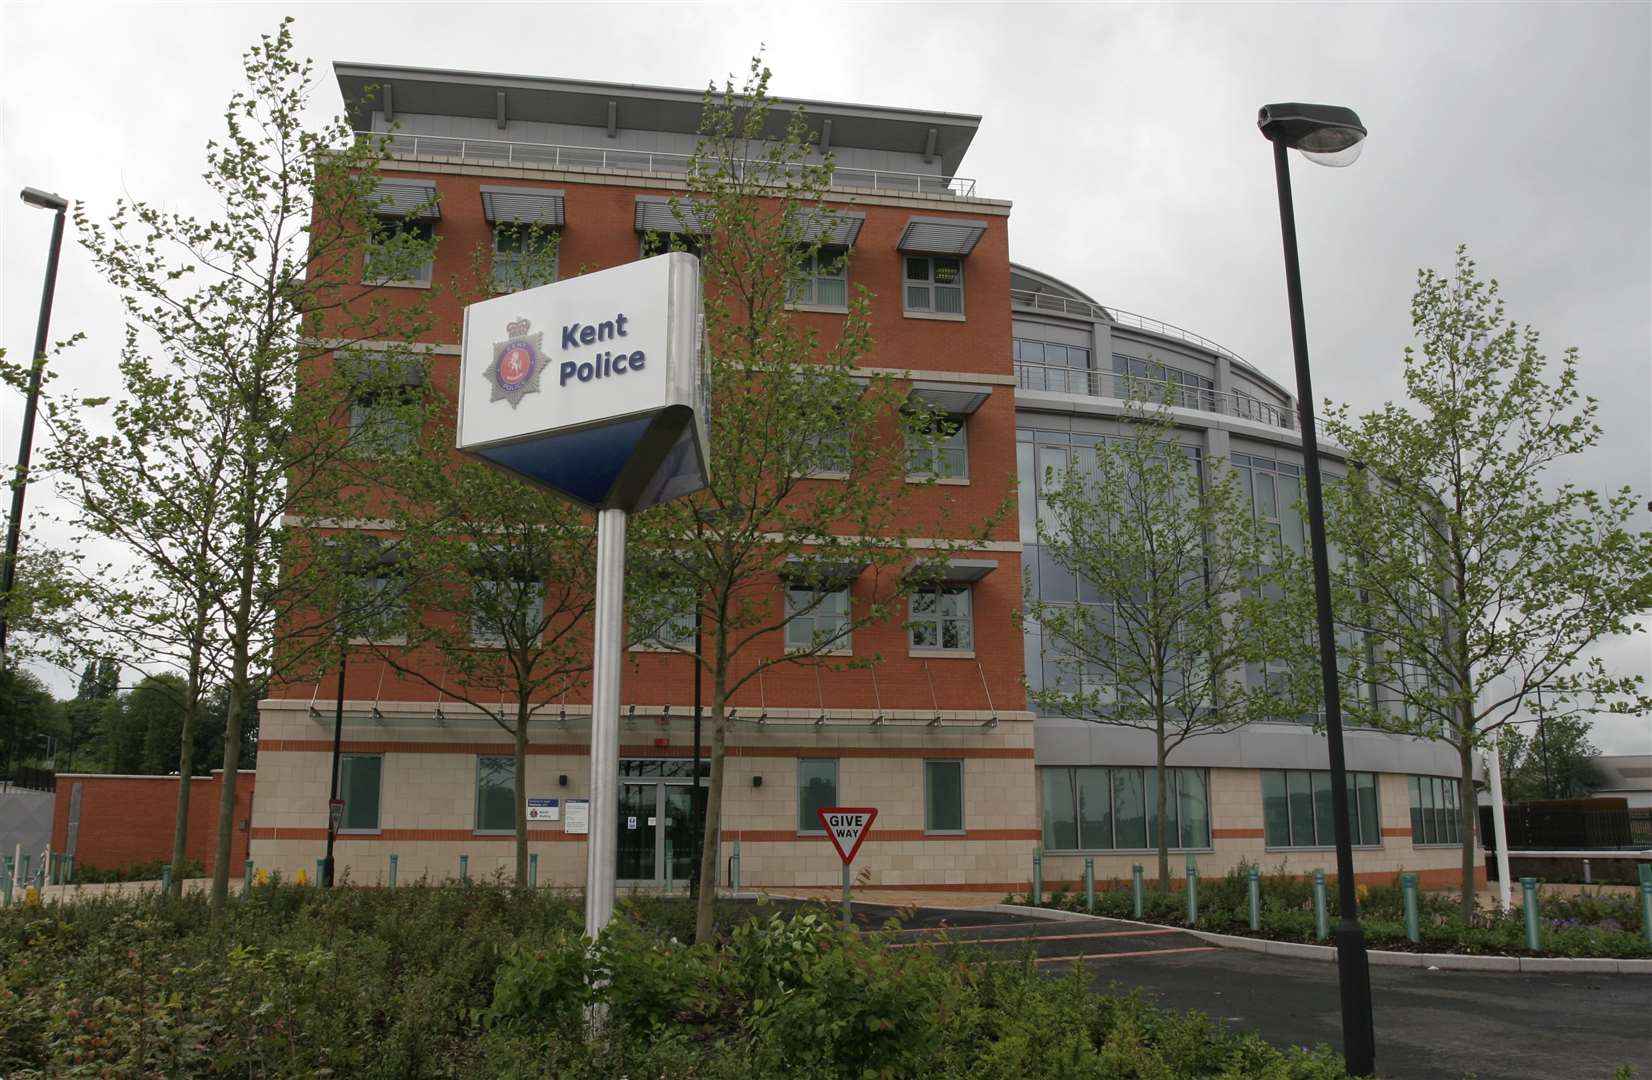 The attack happened outside Medway Police Station